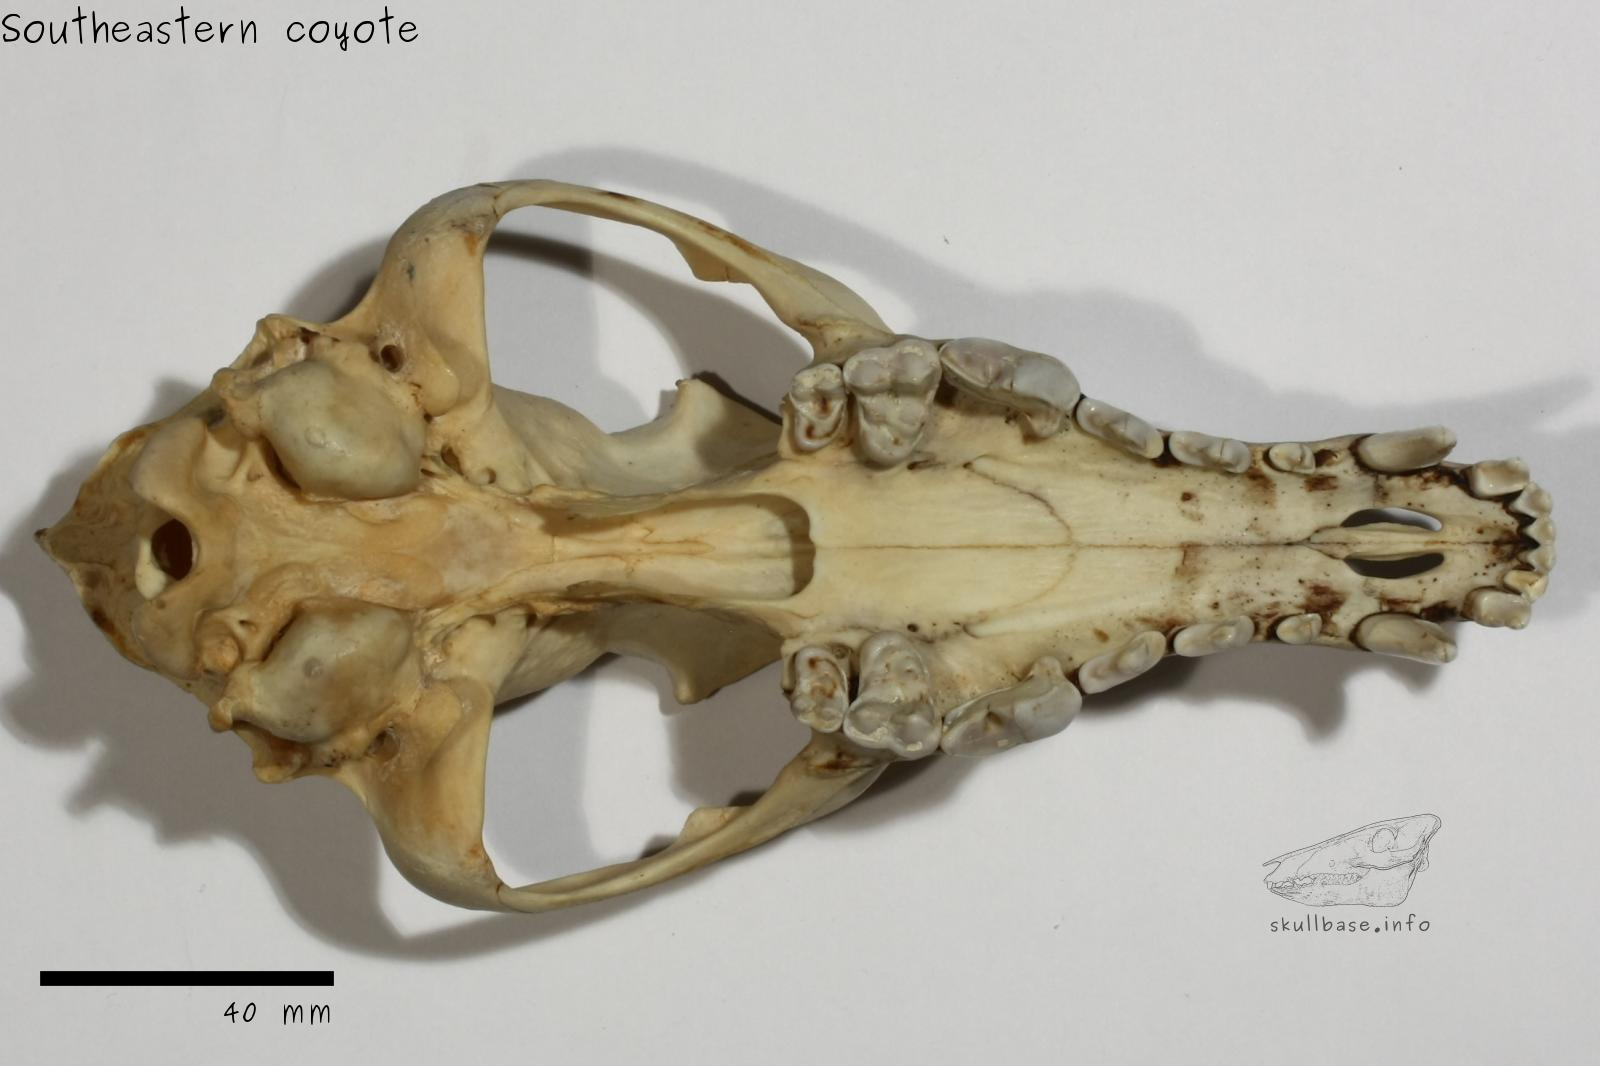 Southeastern coyote (Canis latrans frustor) skull ventral view